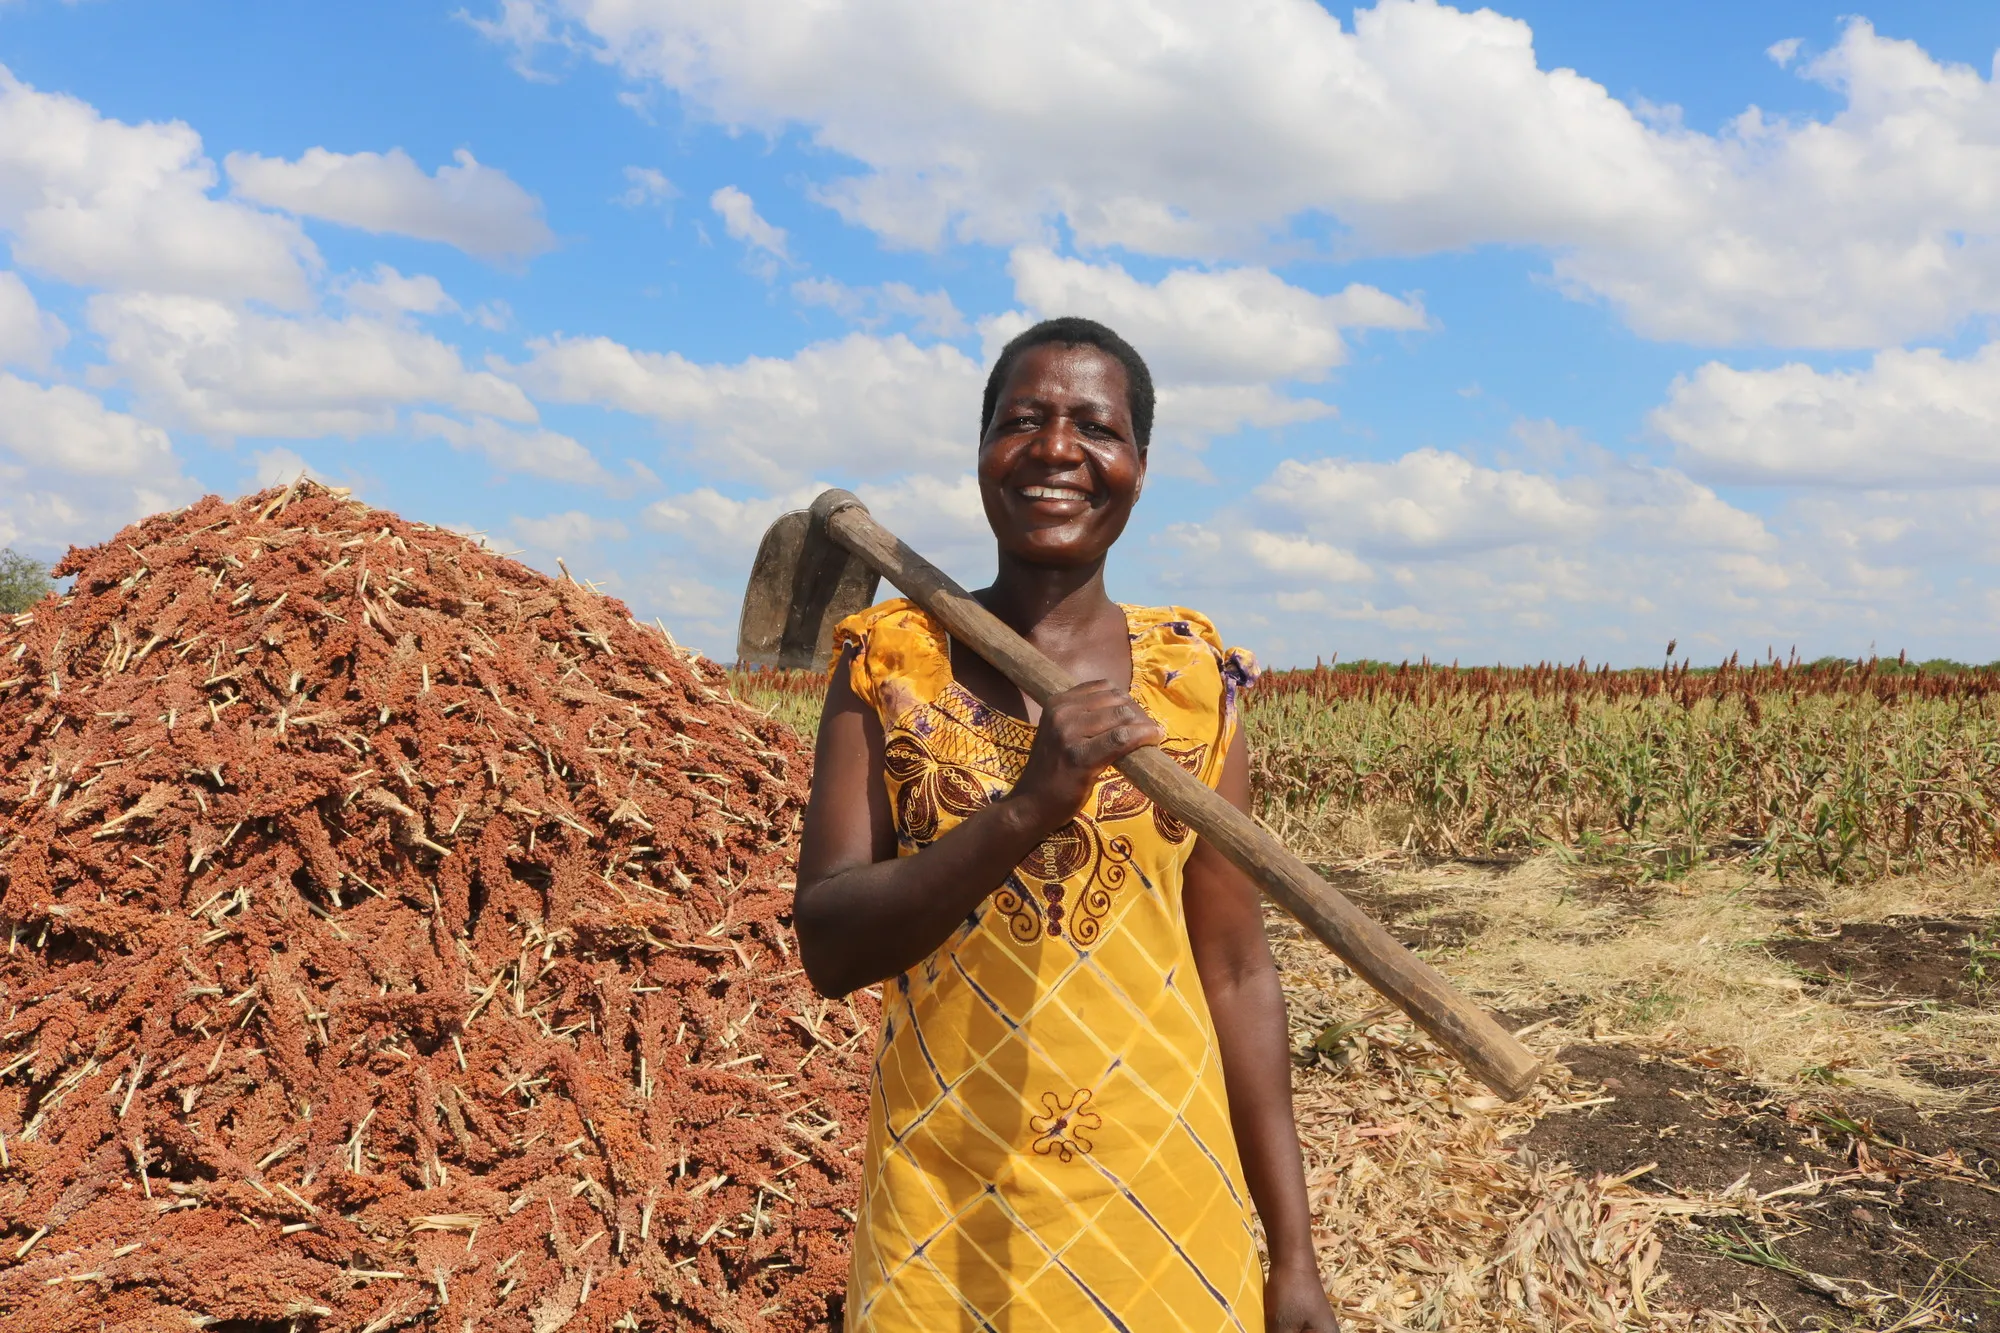 Smiling woman outdoors, holding a tool in front of a stack of harvested crops